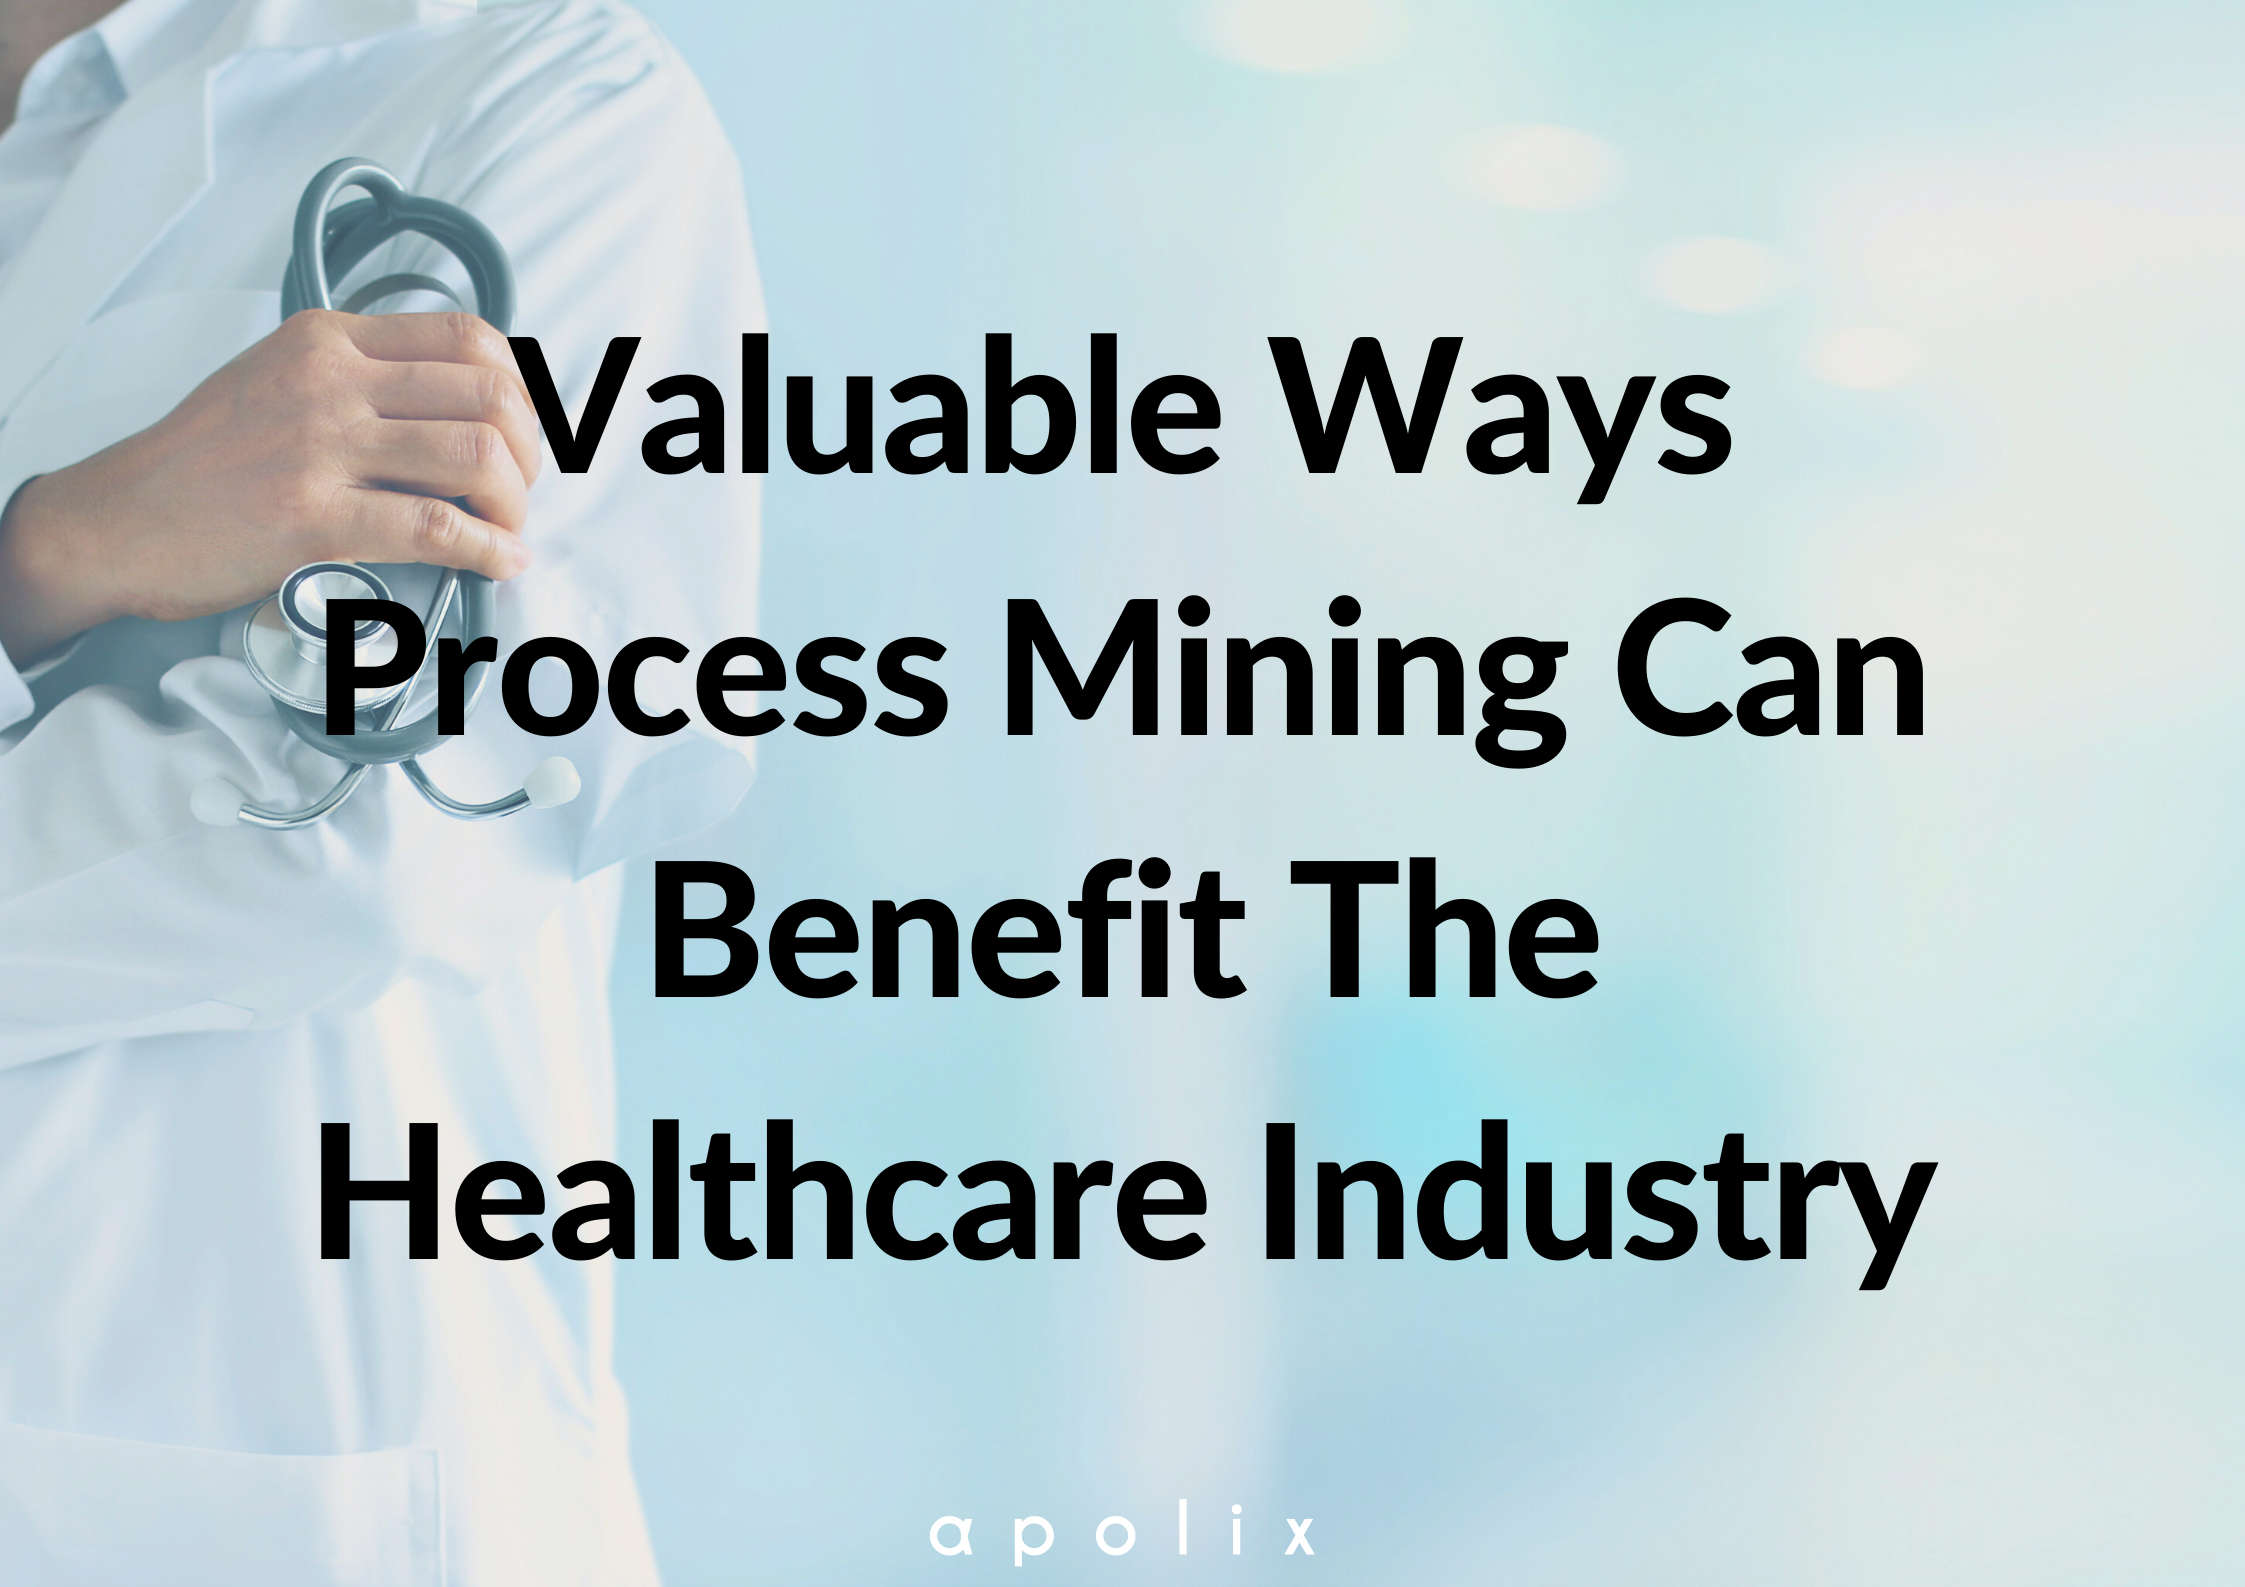 Valuable Ways Process Mining Can Benefit The Healthcare Industry